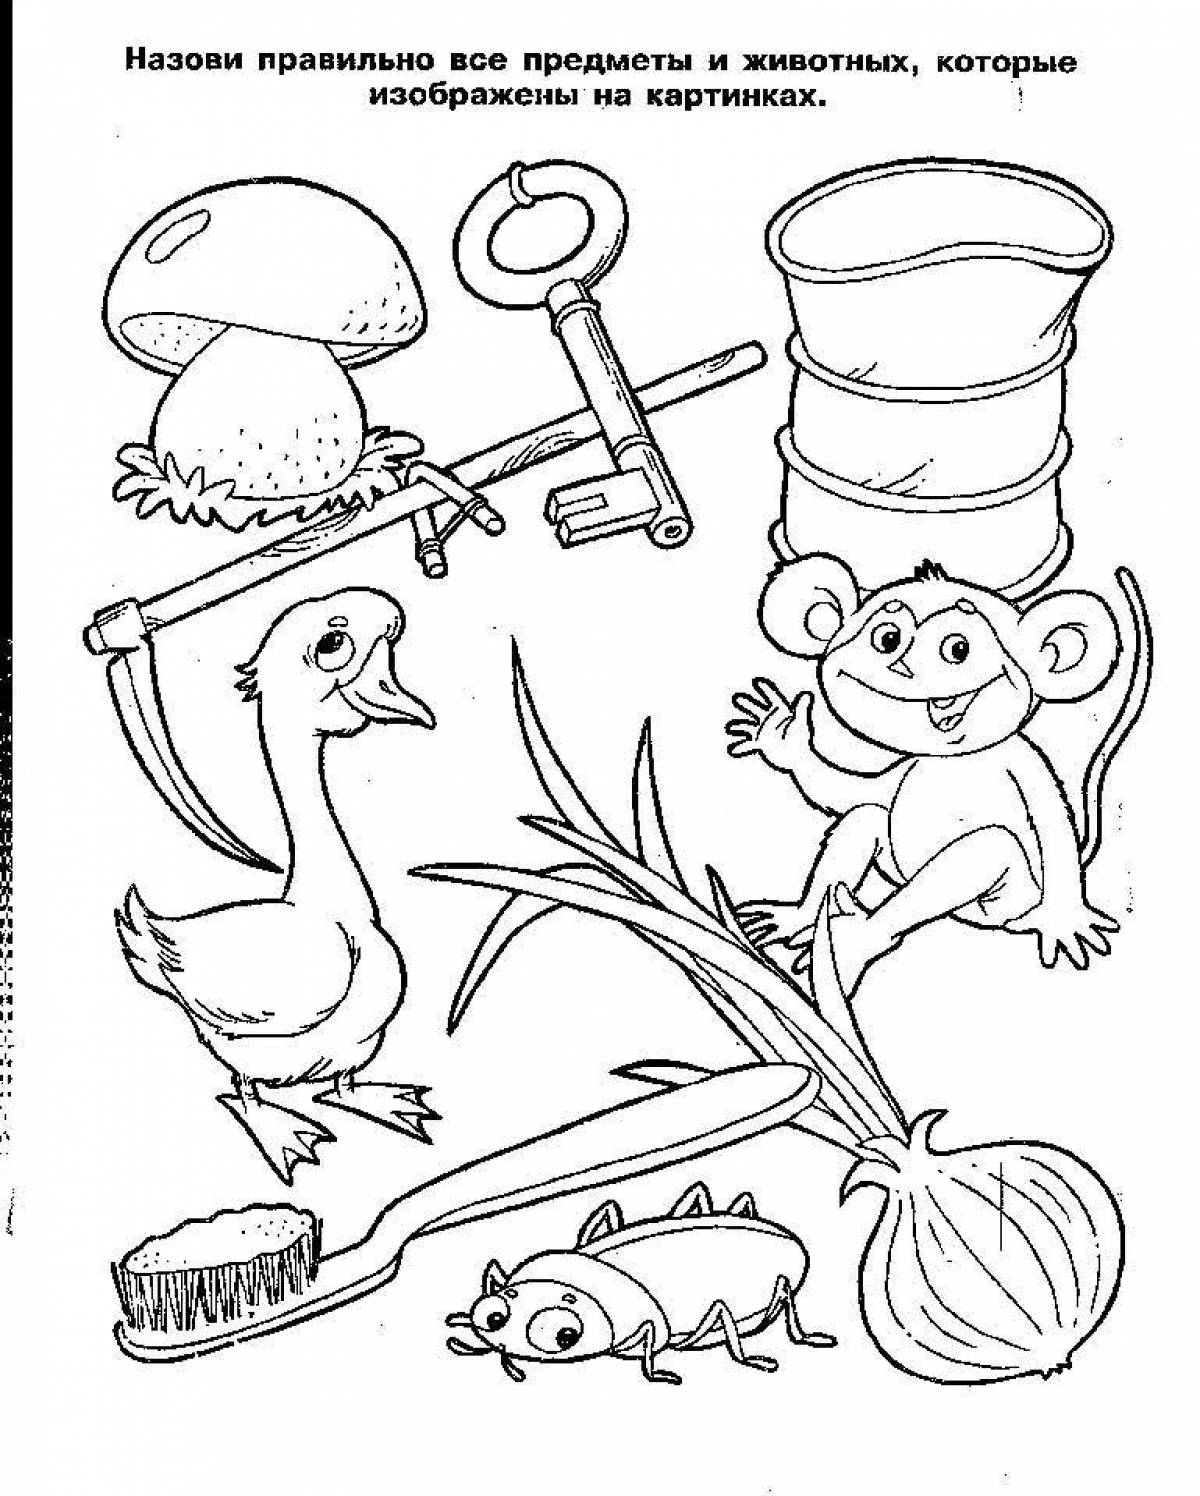 A fun coloring book for kids aged 6 to 7